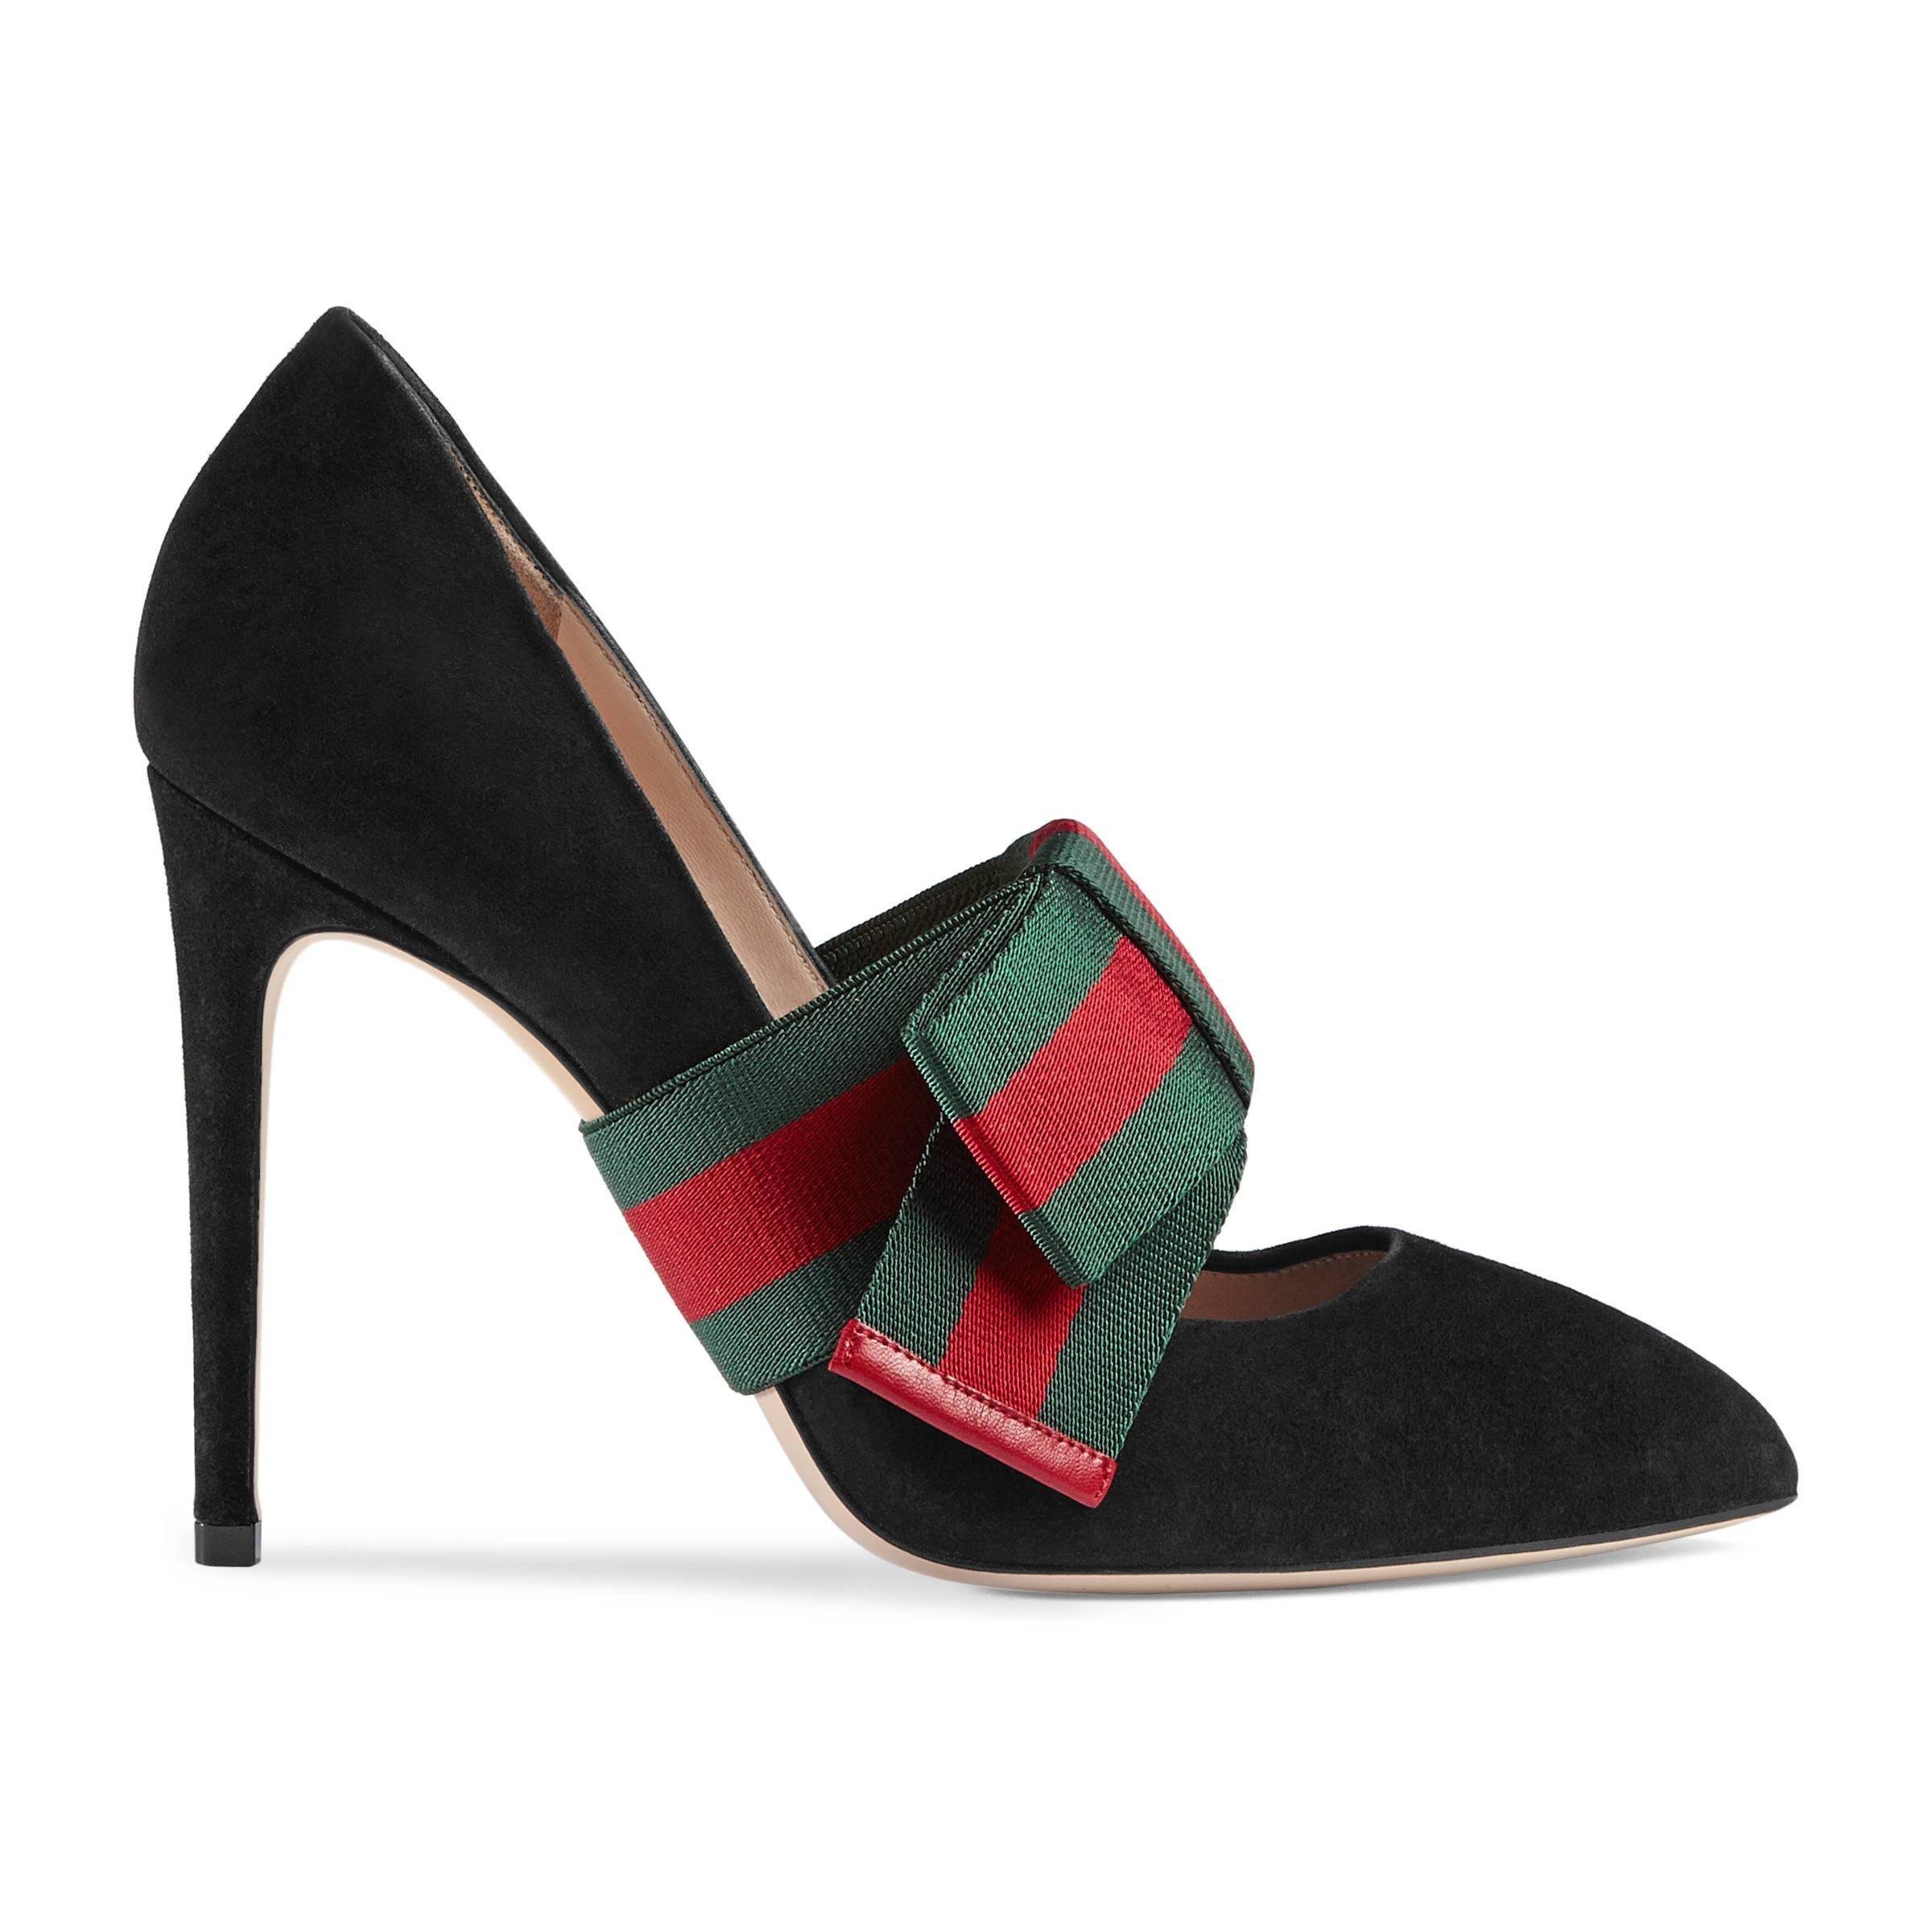 Turning Locker nap Gucci Suede Pump With Removable Web Bow in Black | Lyst